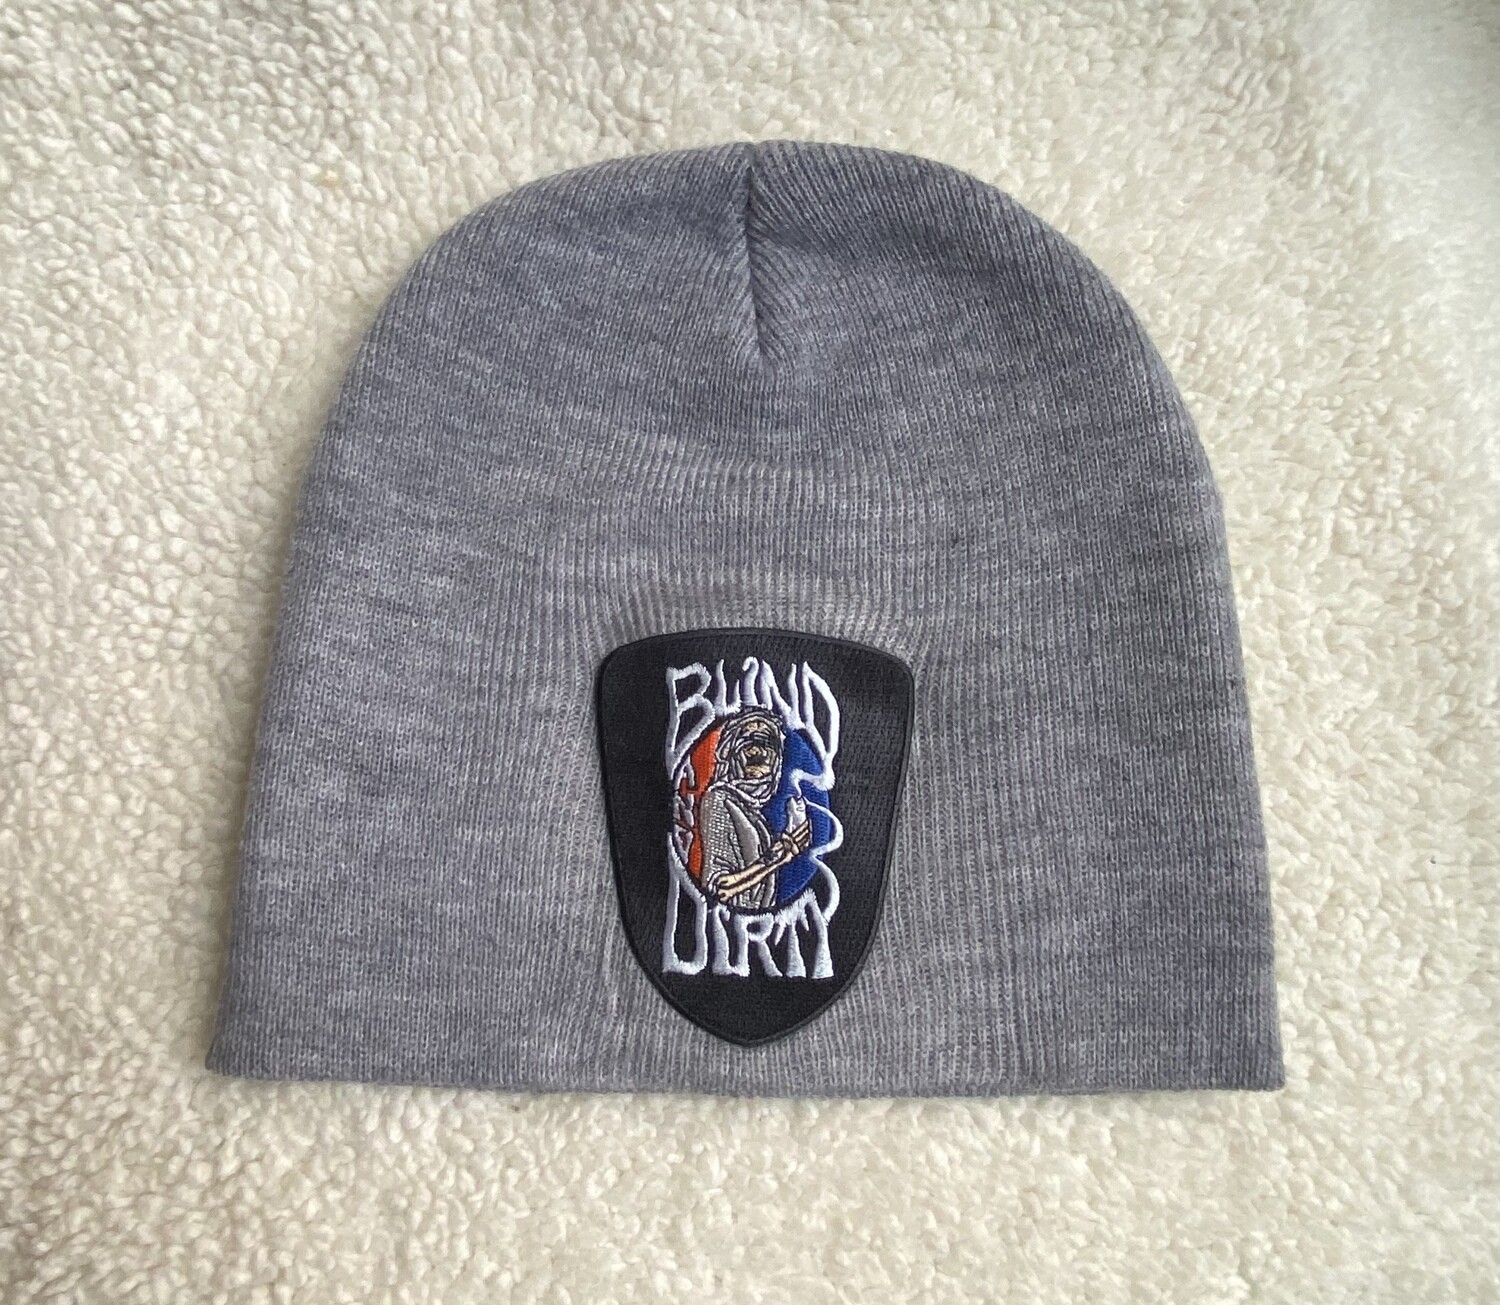 Men’s knit beanie with custom embroidered patch, gray